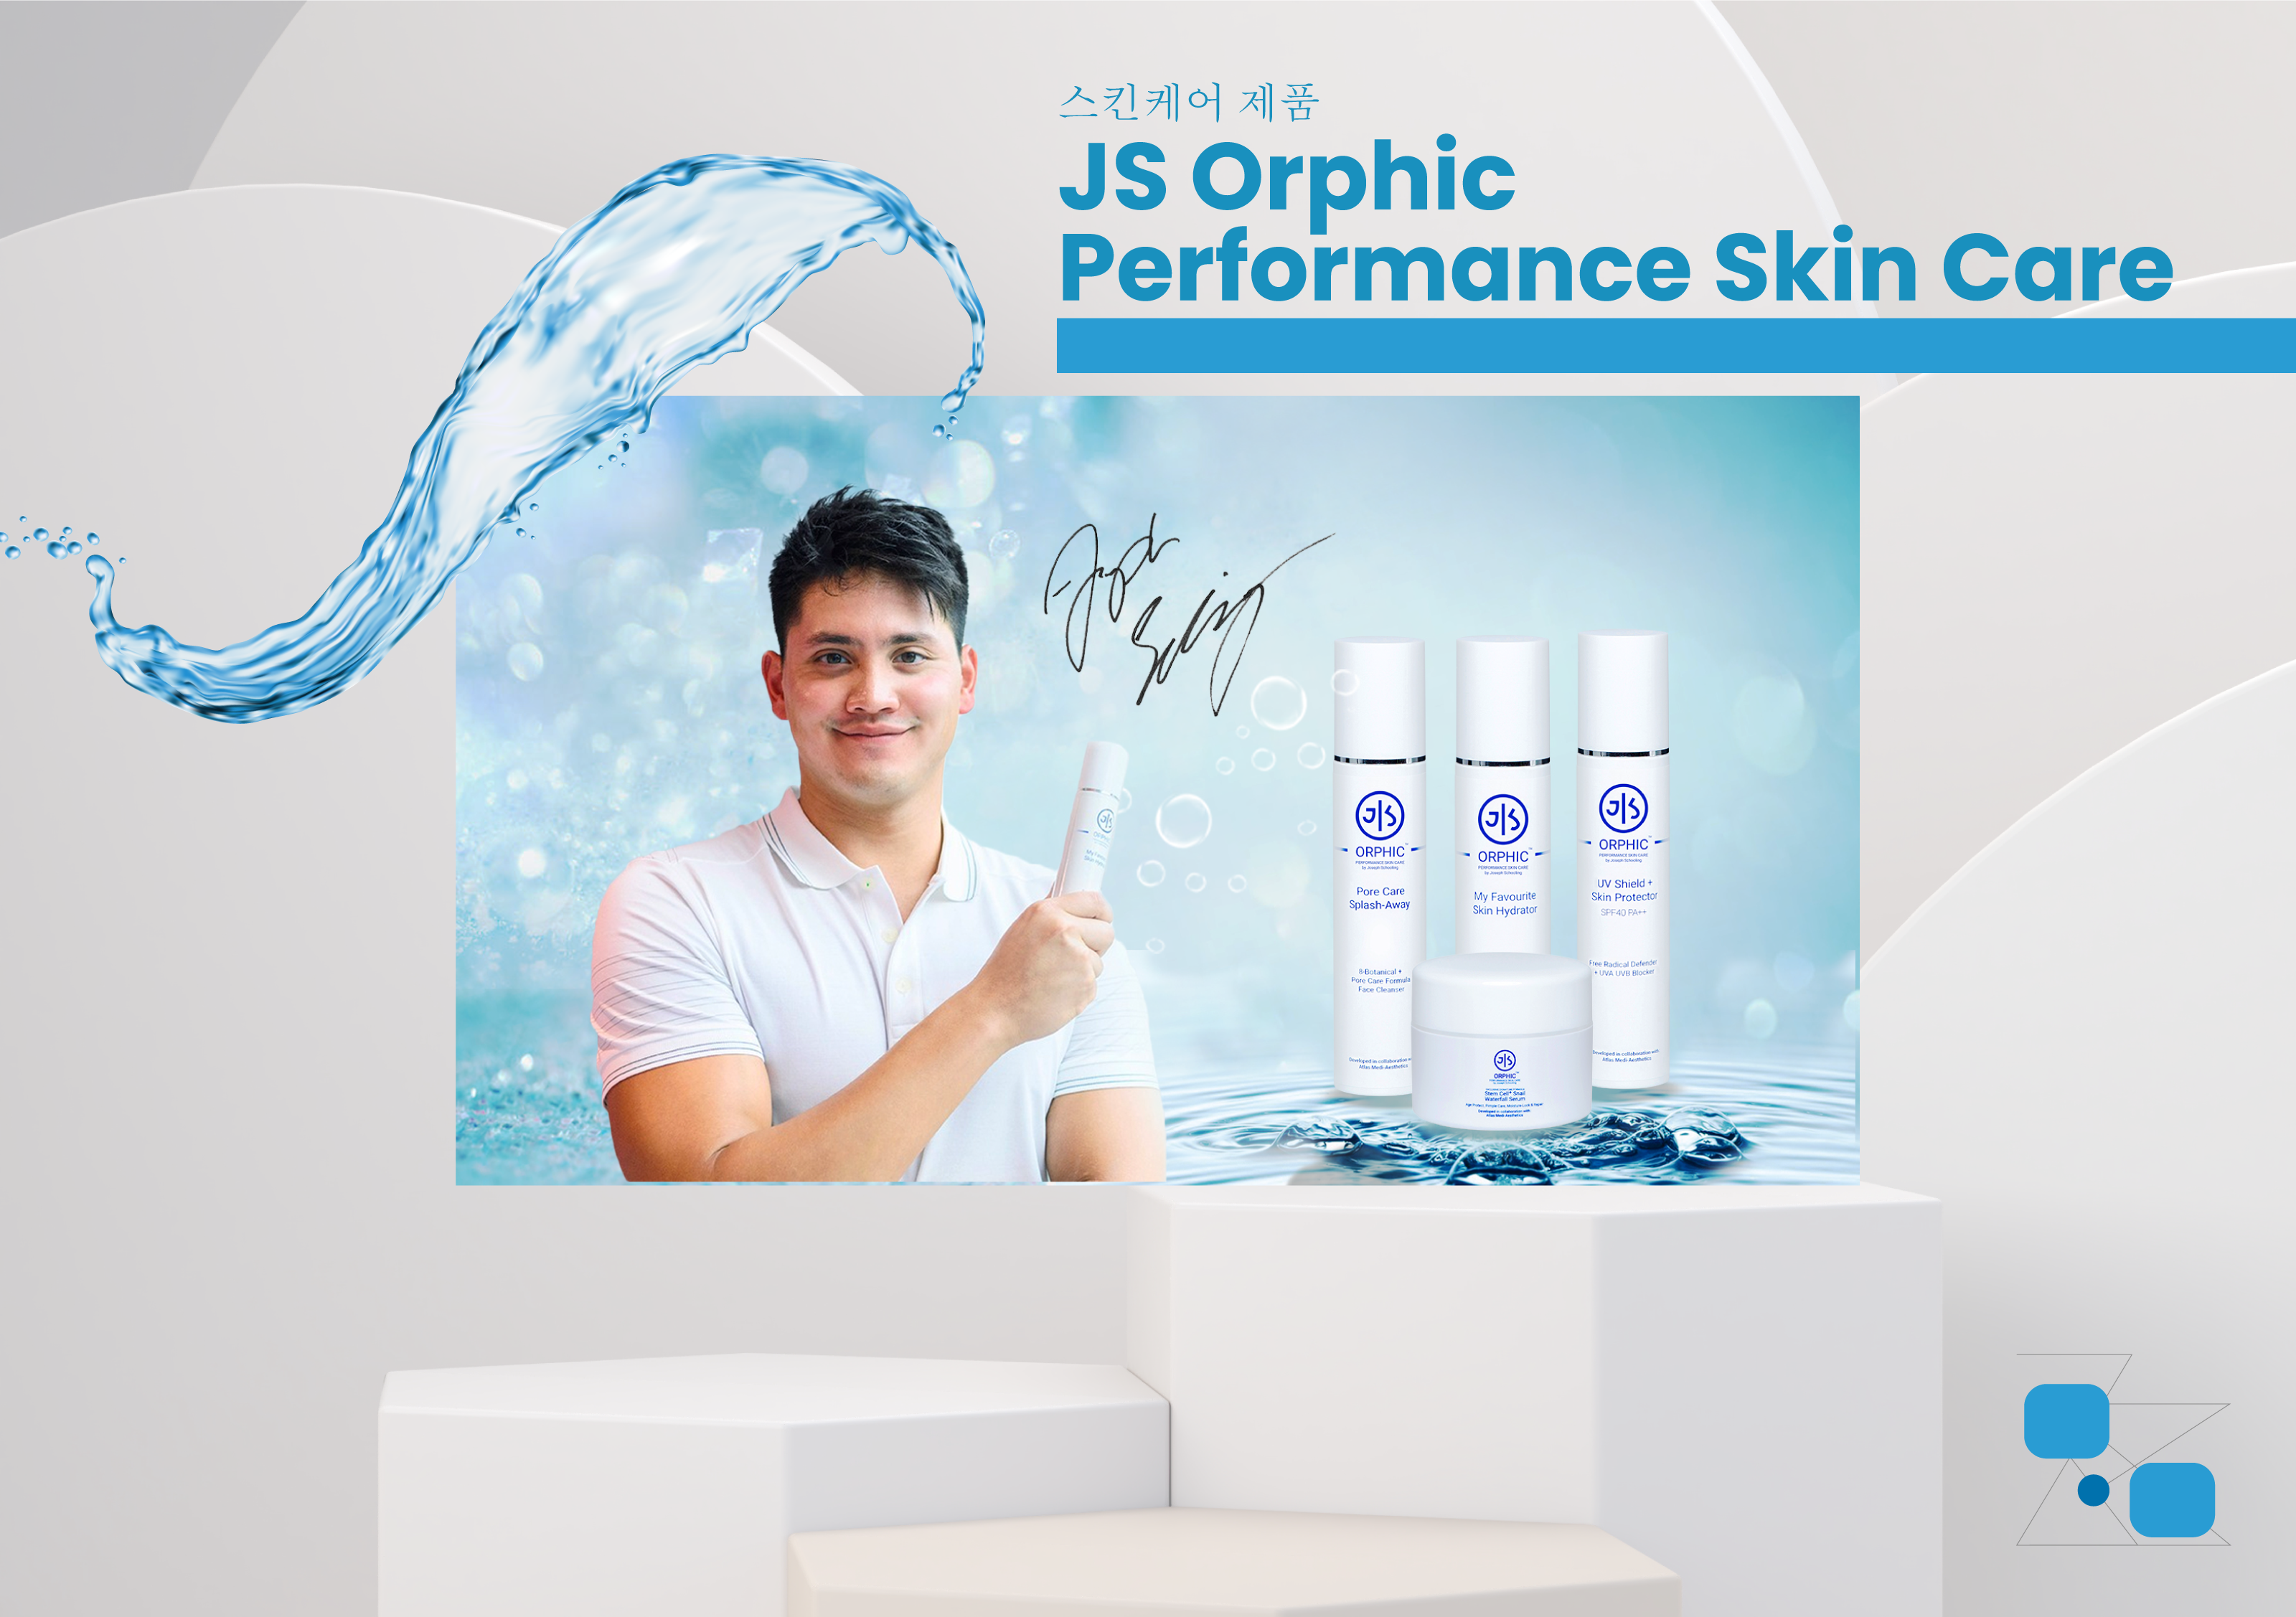 Orphic products